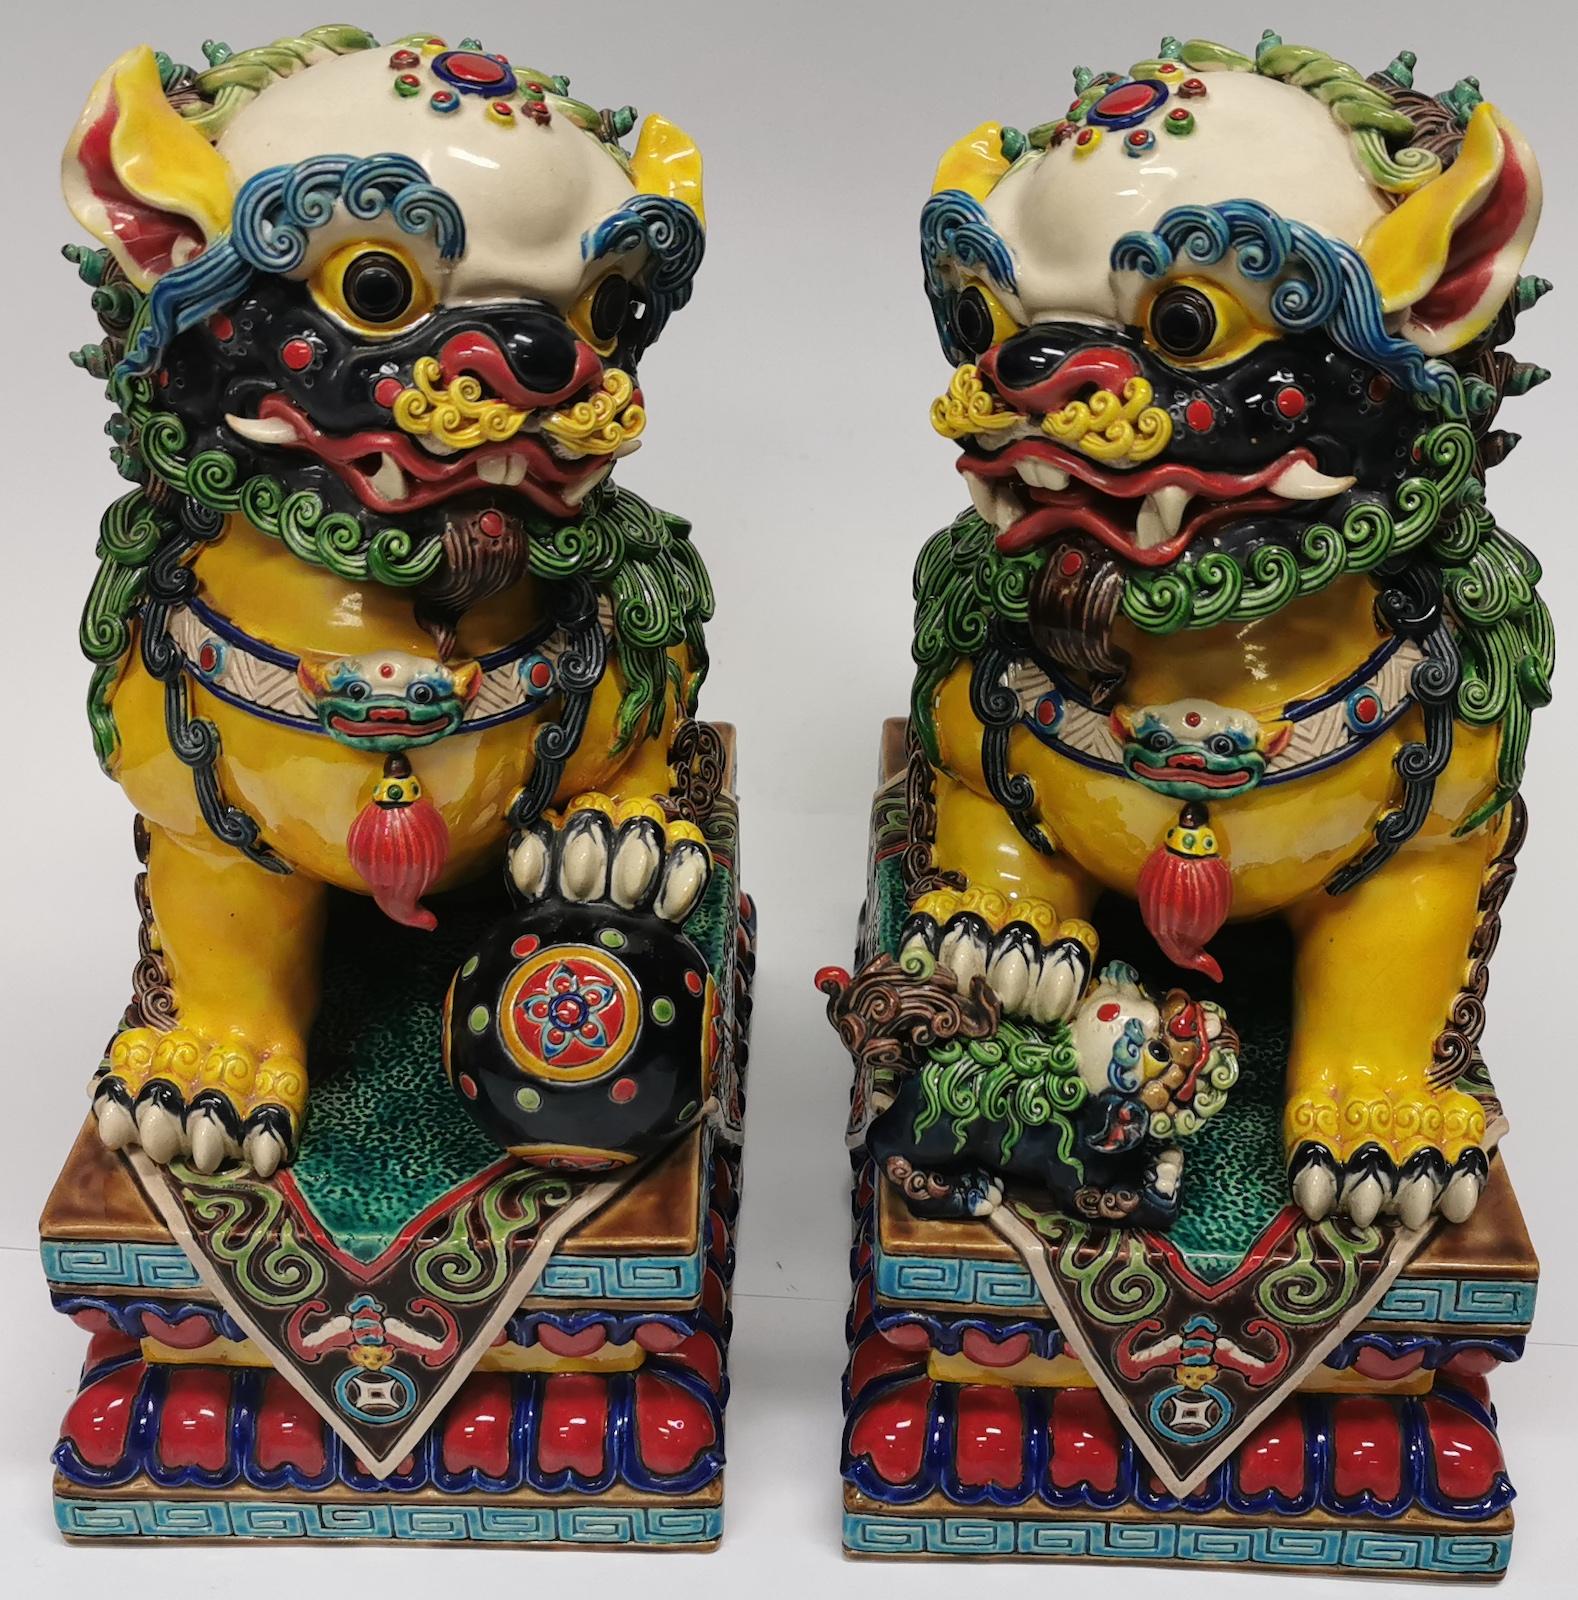 Pair of Chinese foo dogs.
Made in the Koji style, a colorful painted pottery/polychromatic glazed porcelain fired at low temperatures.
Using a range of techniques, Koji pottery derives from the tri-chromatic sancai pottery which was popular in